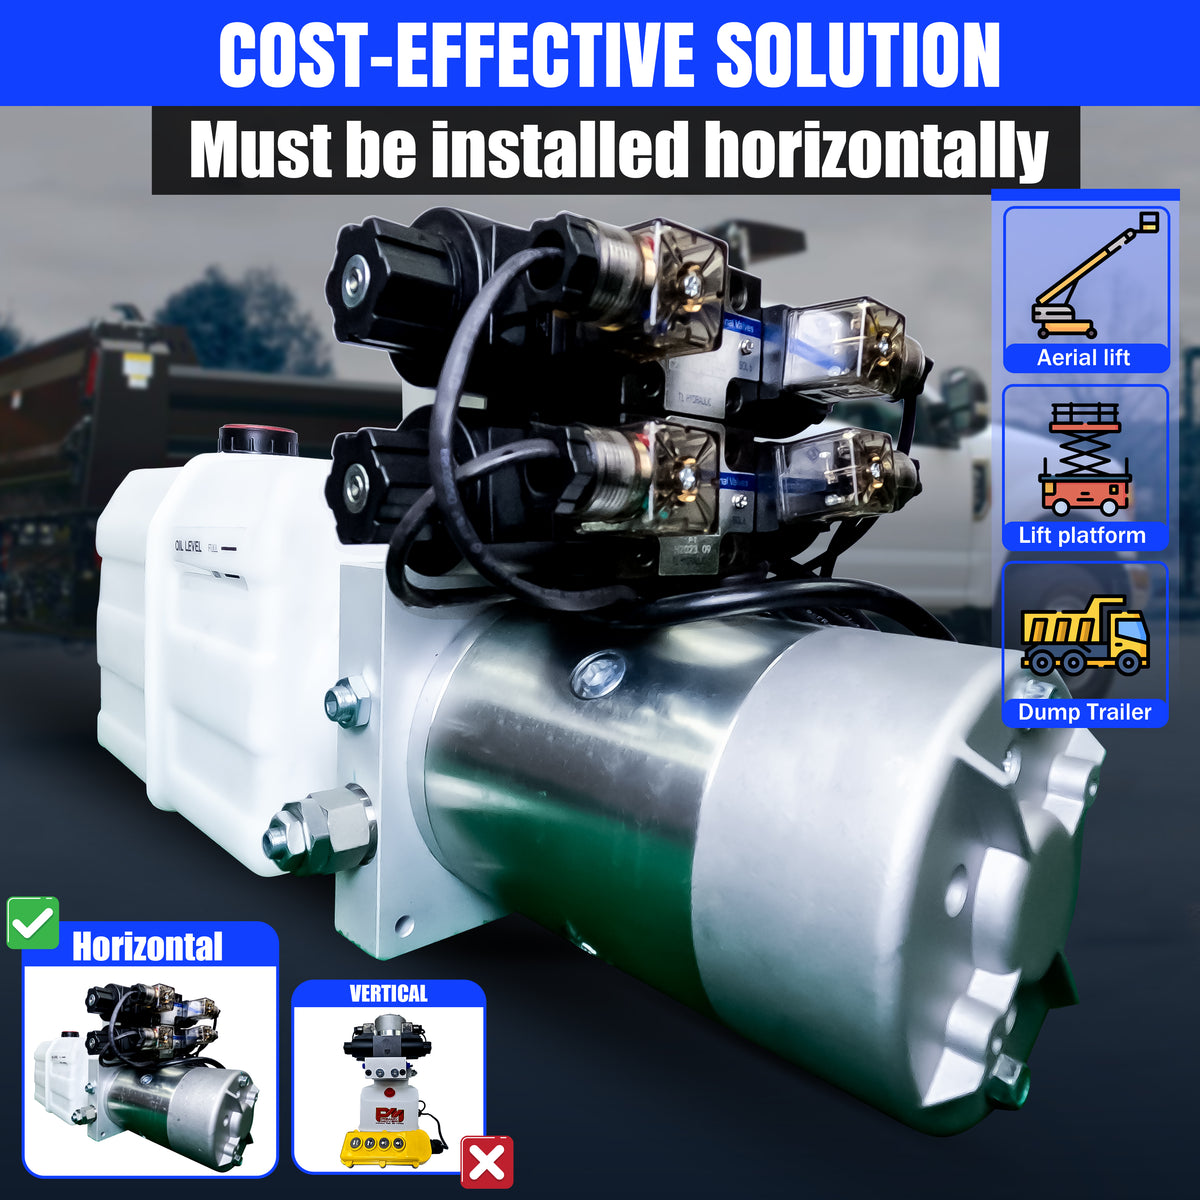 Primary Mover 12V Dual Double-Acting Hydraulic Power Unit: Compact machine with wires, buttons, and a screen shot of a phone. Ideal for dump trailers and trucks.